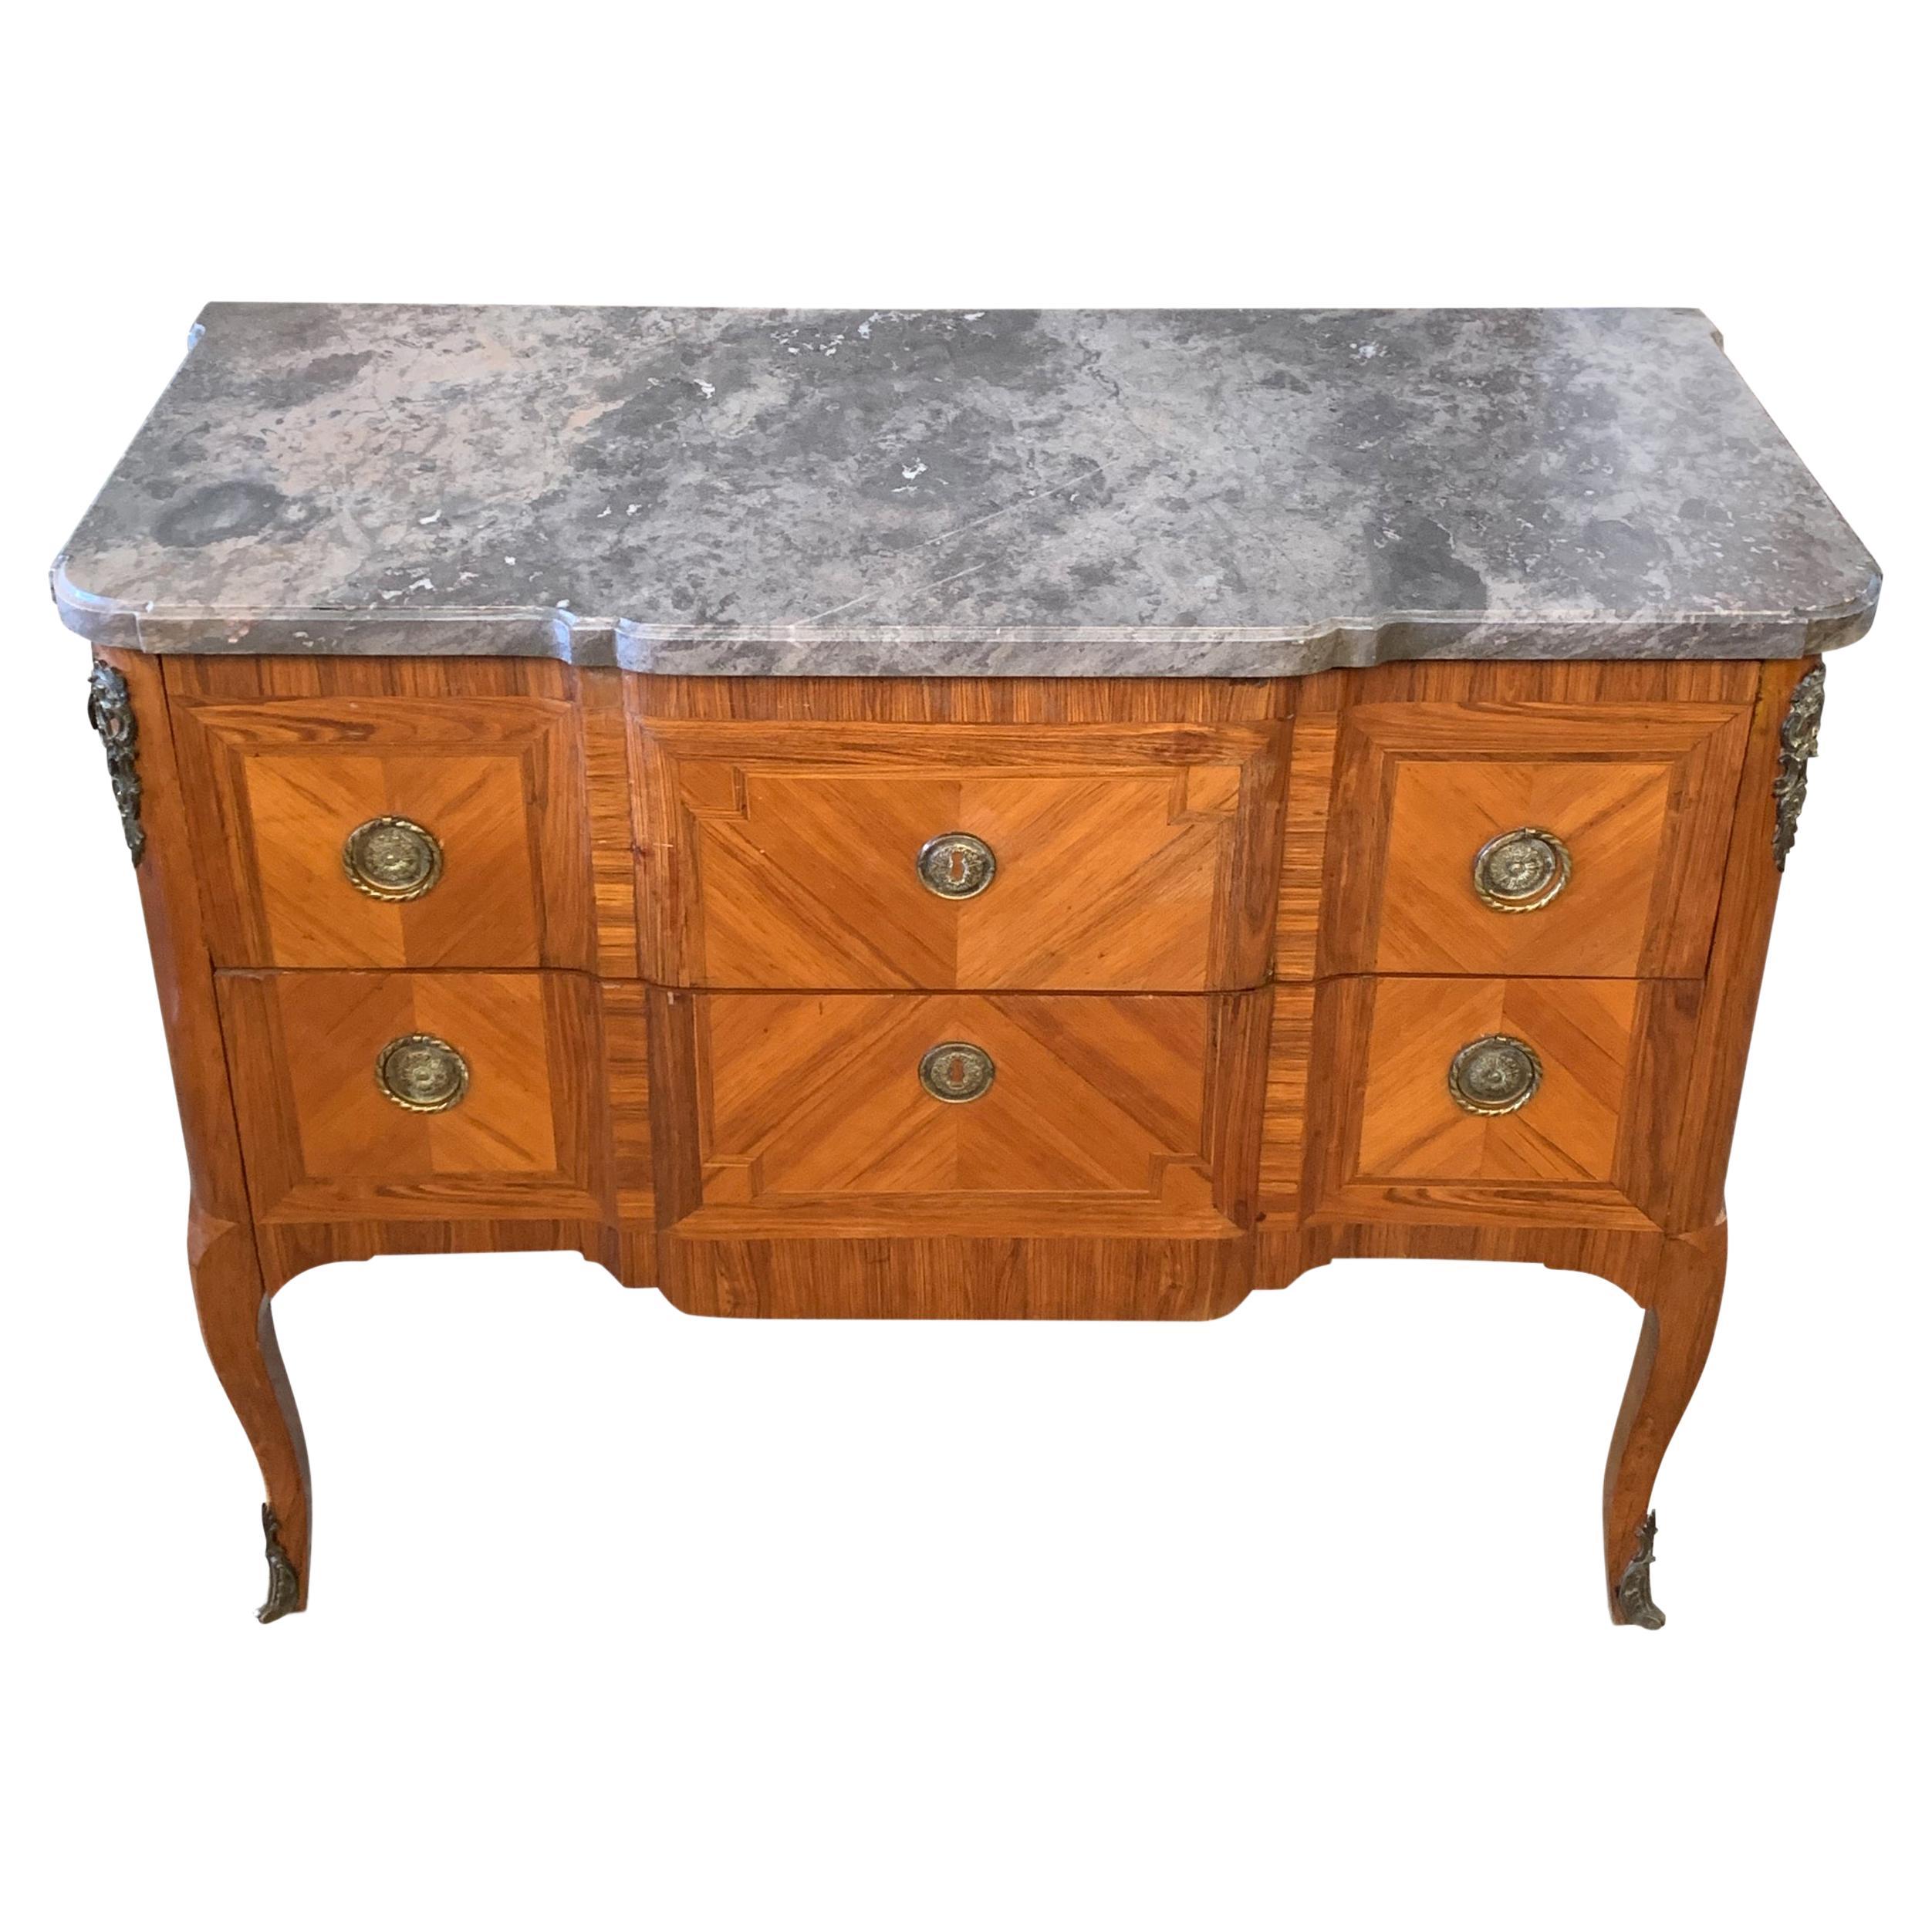 19th century French Louis XVI rosewood banded kingwood breakfront commode, with cabriole legs, finished with a grey marble top

Featuring two long drawers, with gilt metal decoration.

Previous owner was well travelled and this exquisite piece